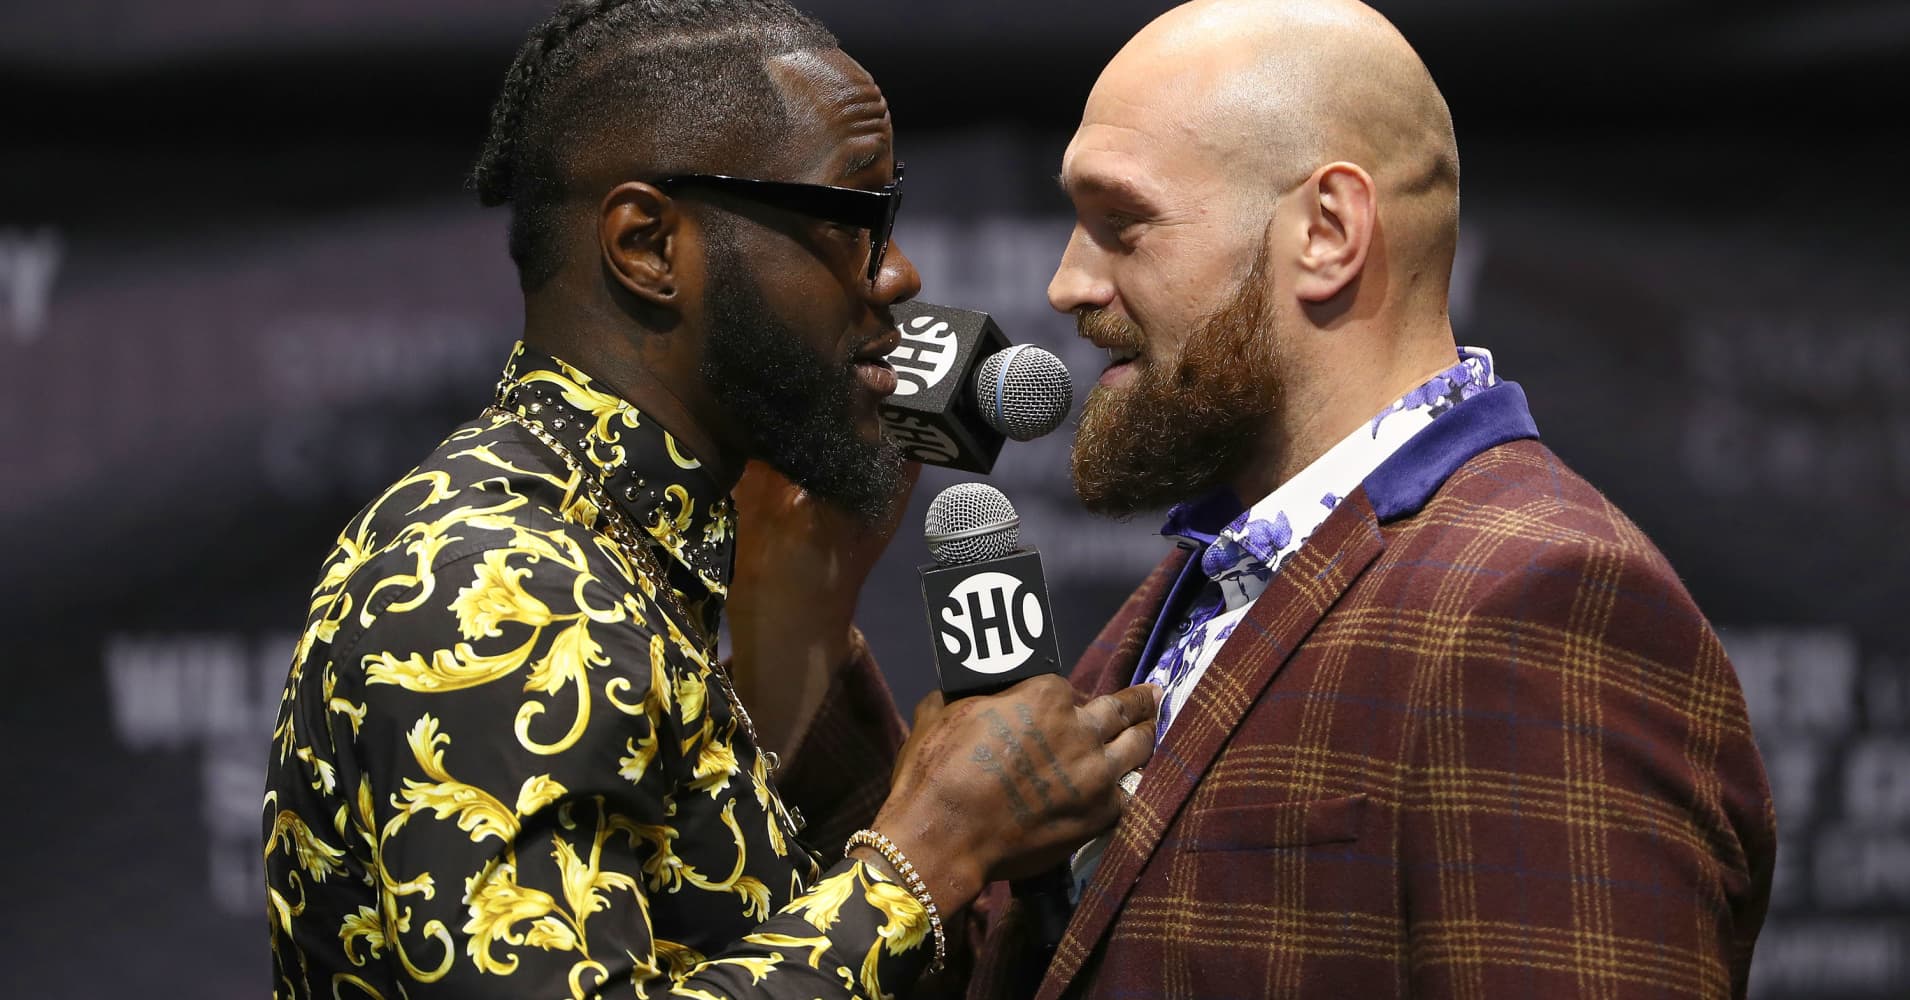 Wilder and Fury's heavyweight matchup could open the door for a $100 million 'superfight'